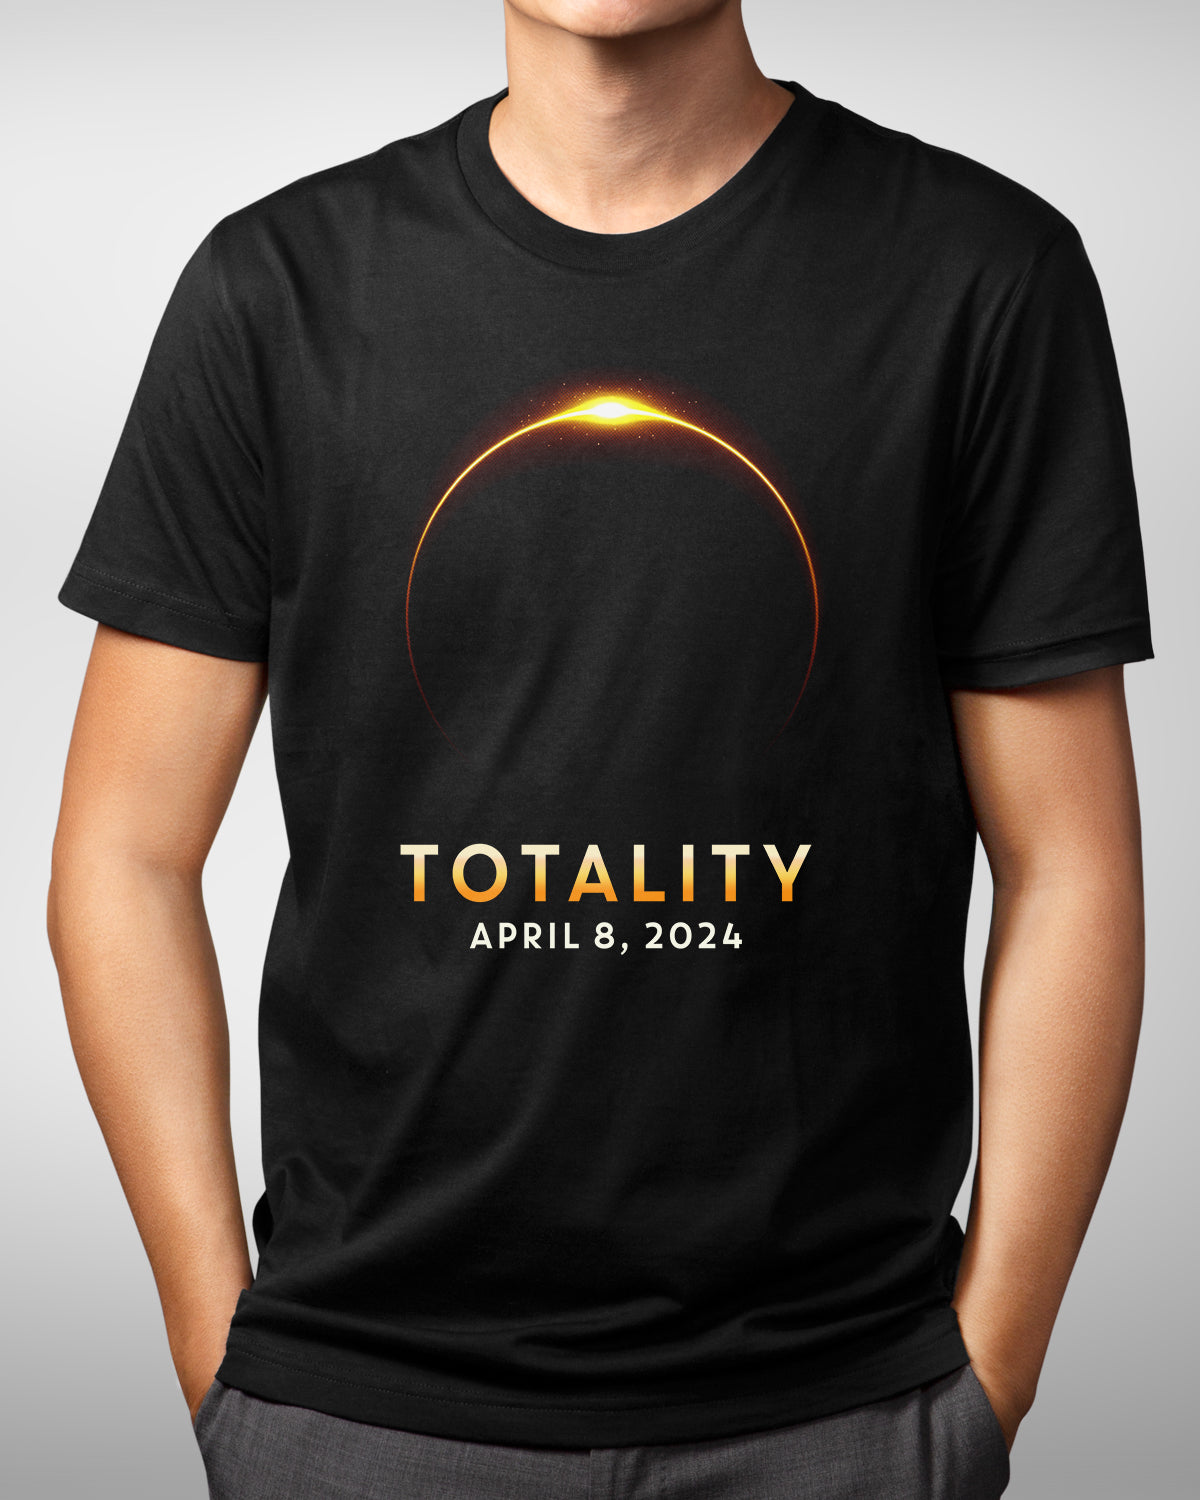 2024 Total Solar Eclipse Tee, April 8th Skywatching Shirt, Astronomy Lover Gift